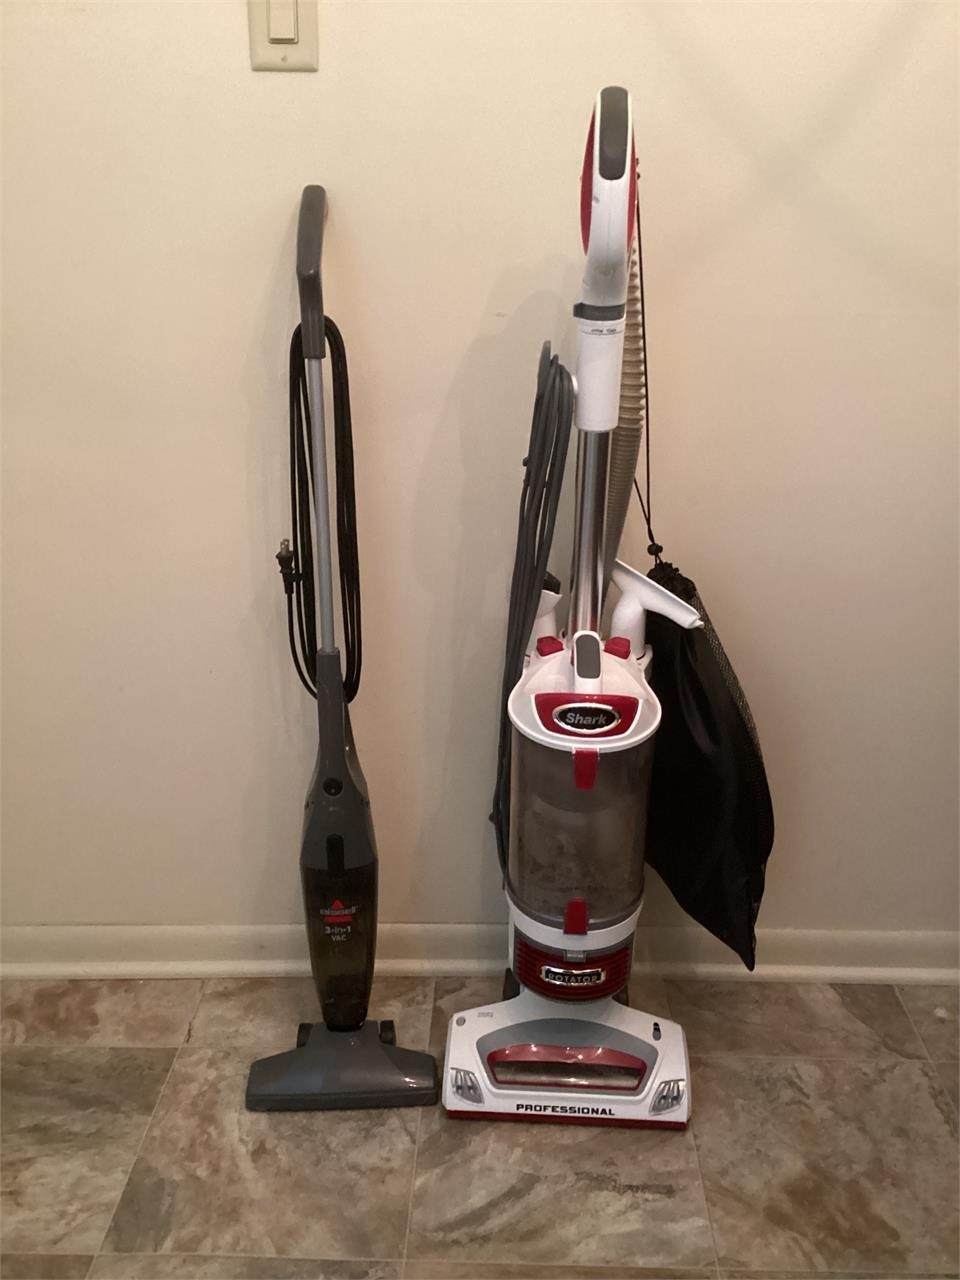 Shark professional, and Bissell sweeper